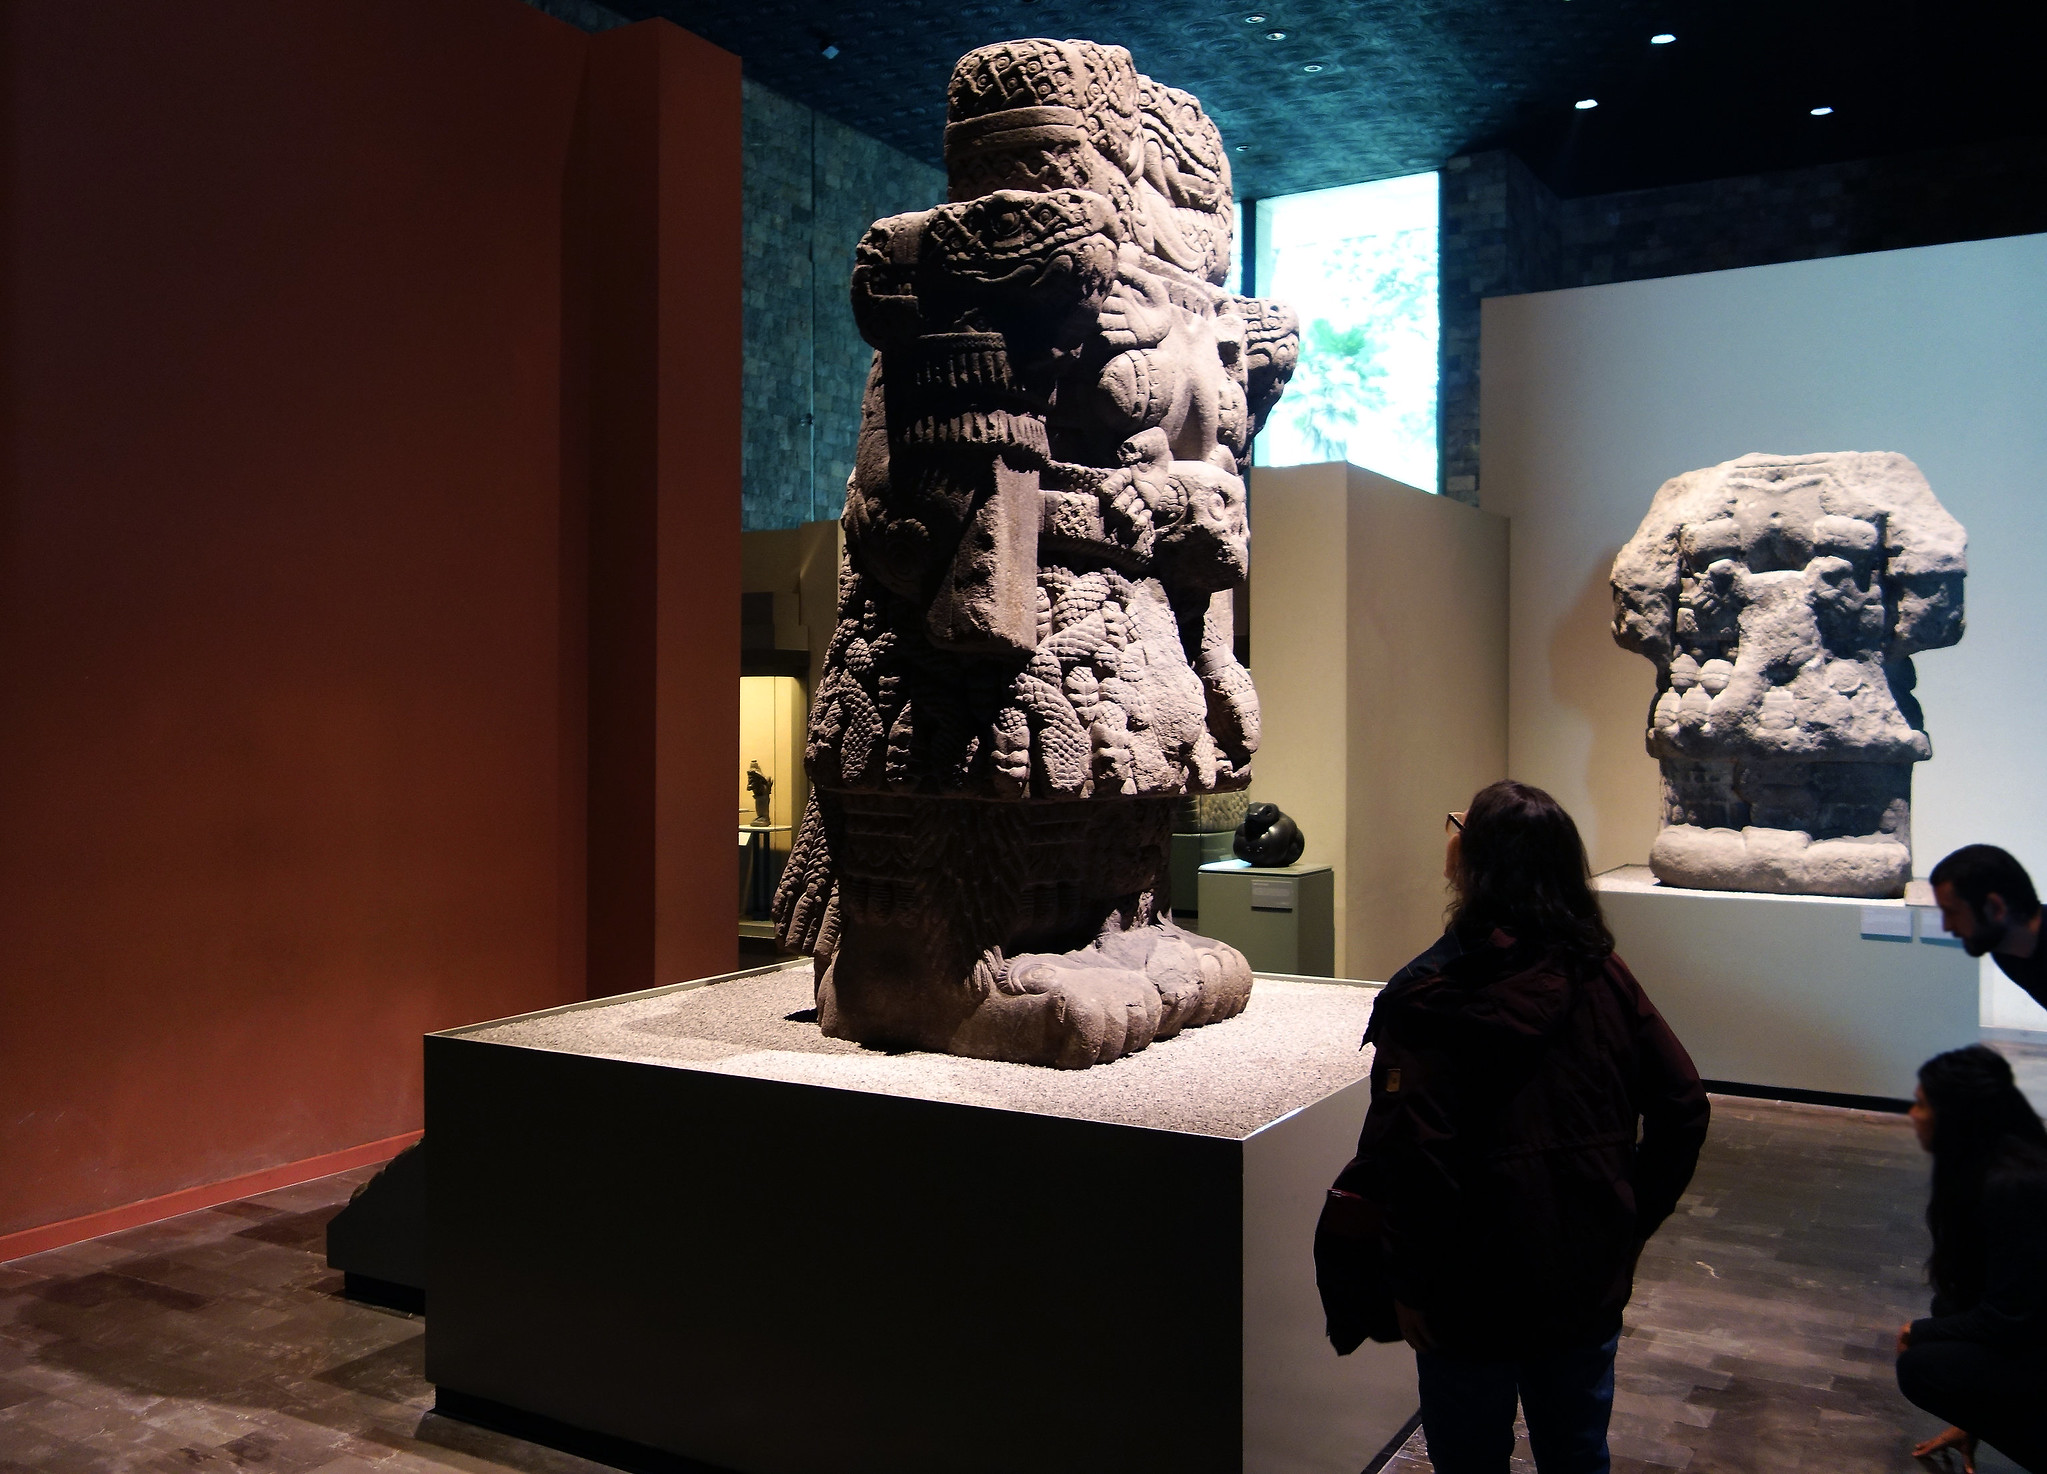 The 'Goddess' and the Museum: What's in a name?